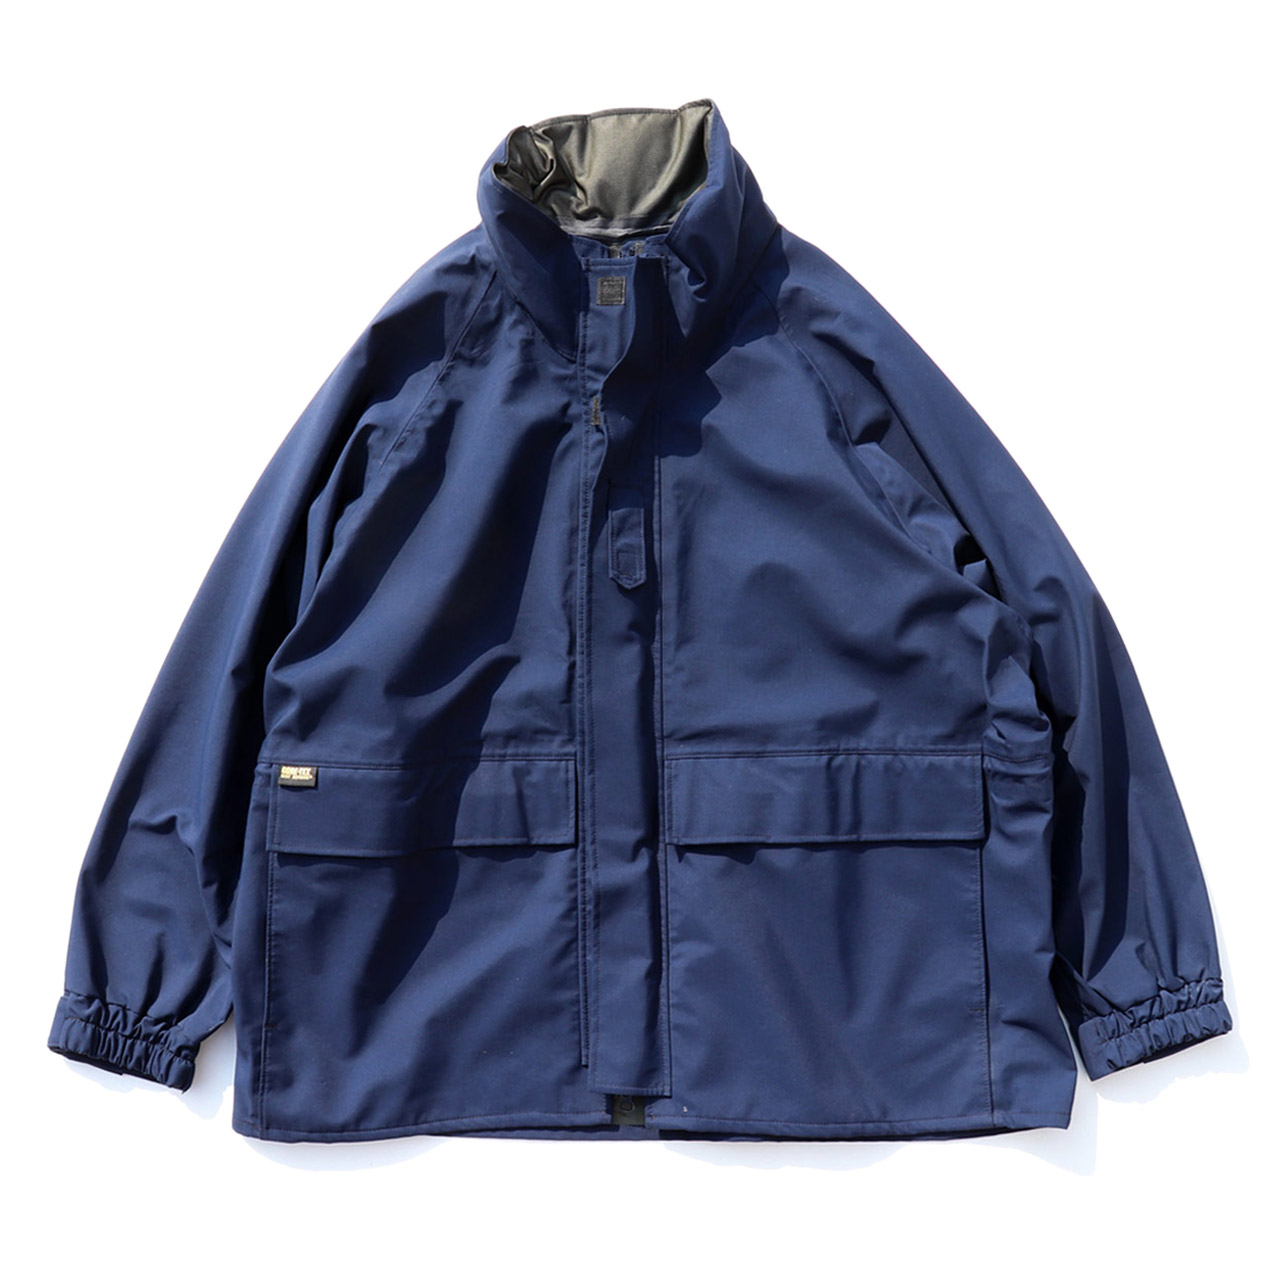 POST JUNK / 00's PROPPER USA製 FOUL WEATHER USCG ゴアテックス 